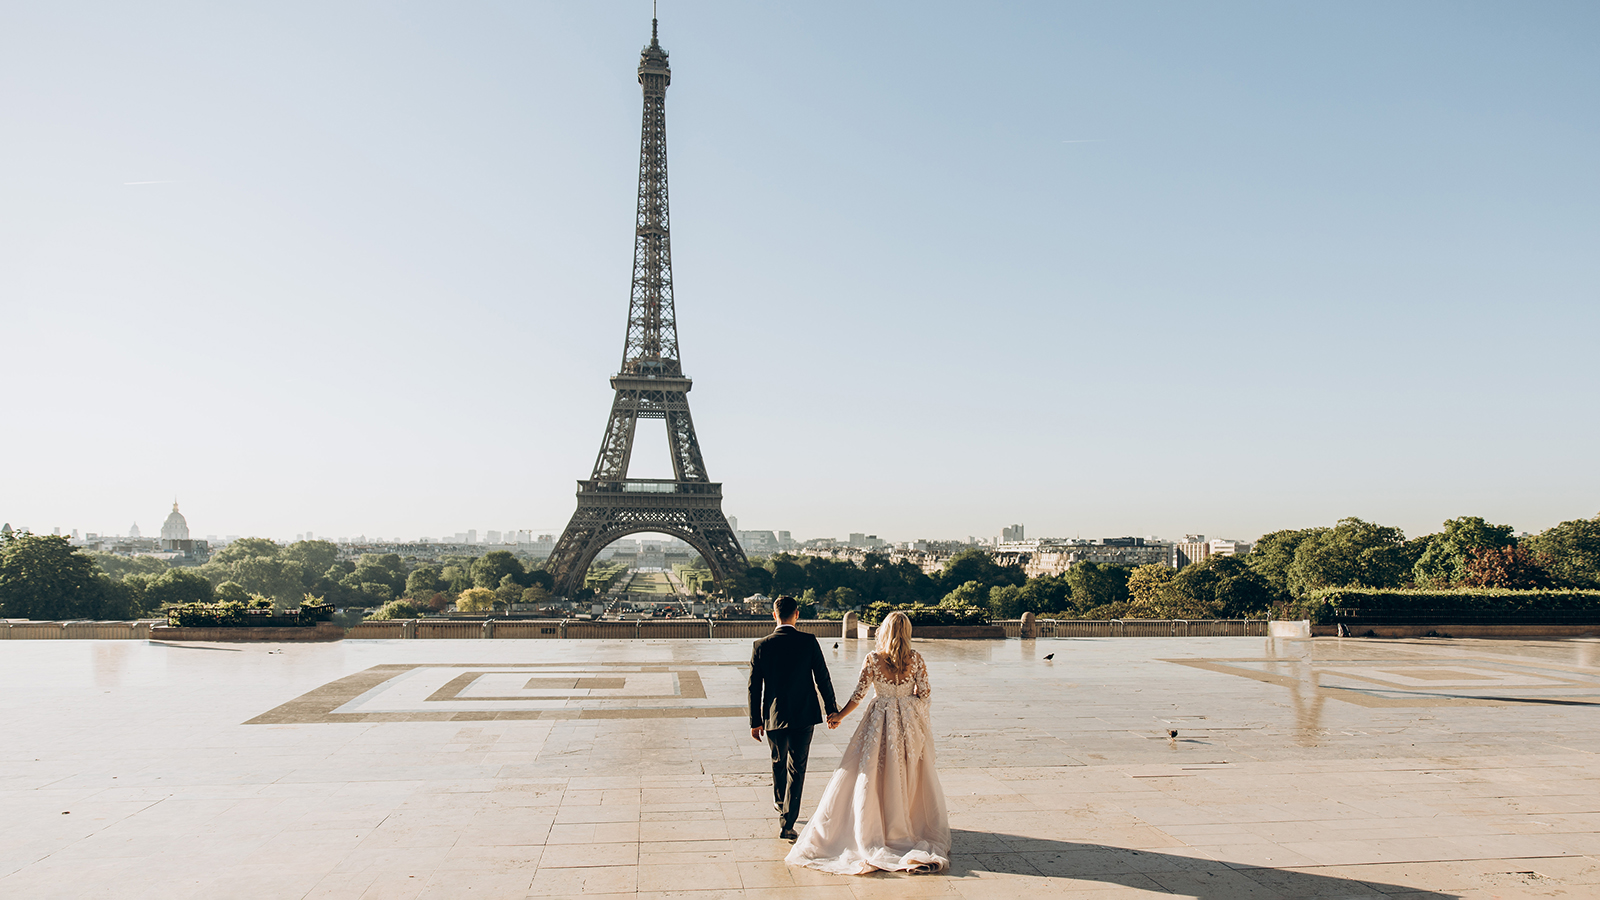 Bride and groom enjoying their wedding in Paris, against the backdrop of the Eiffel Tower